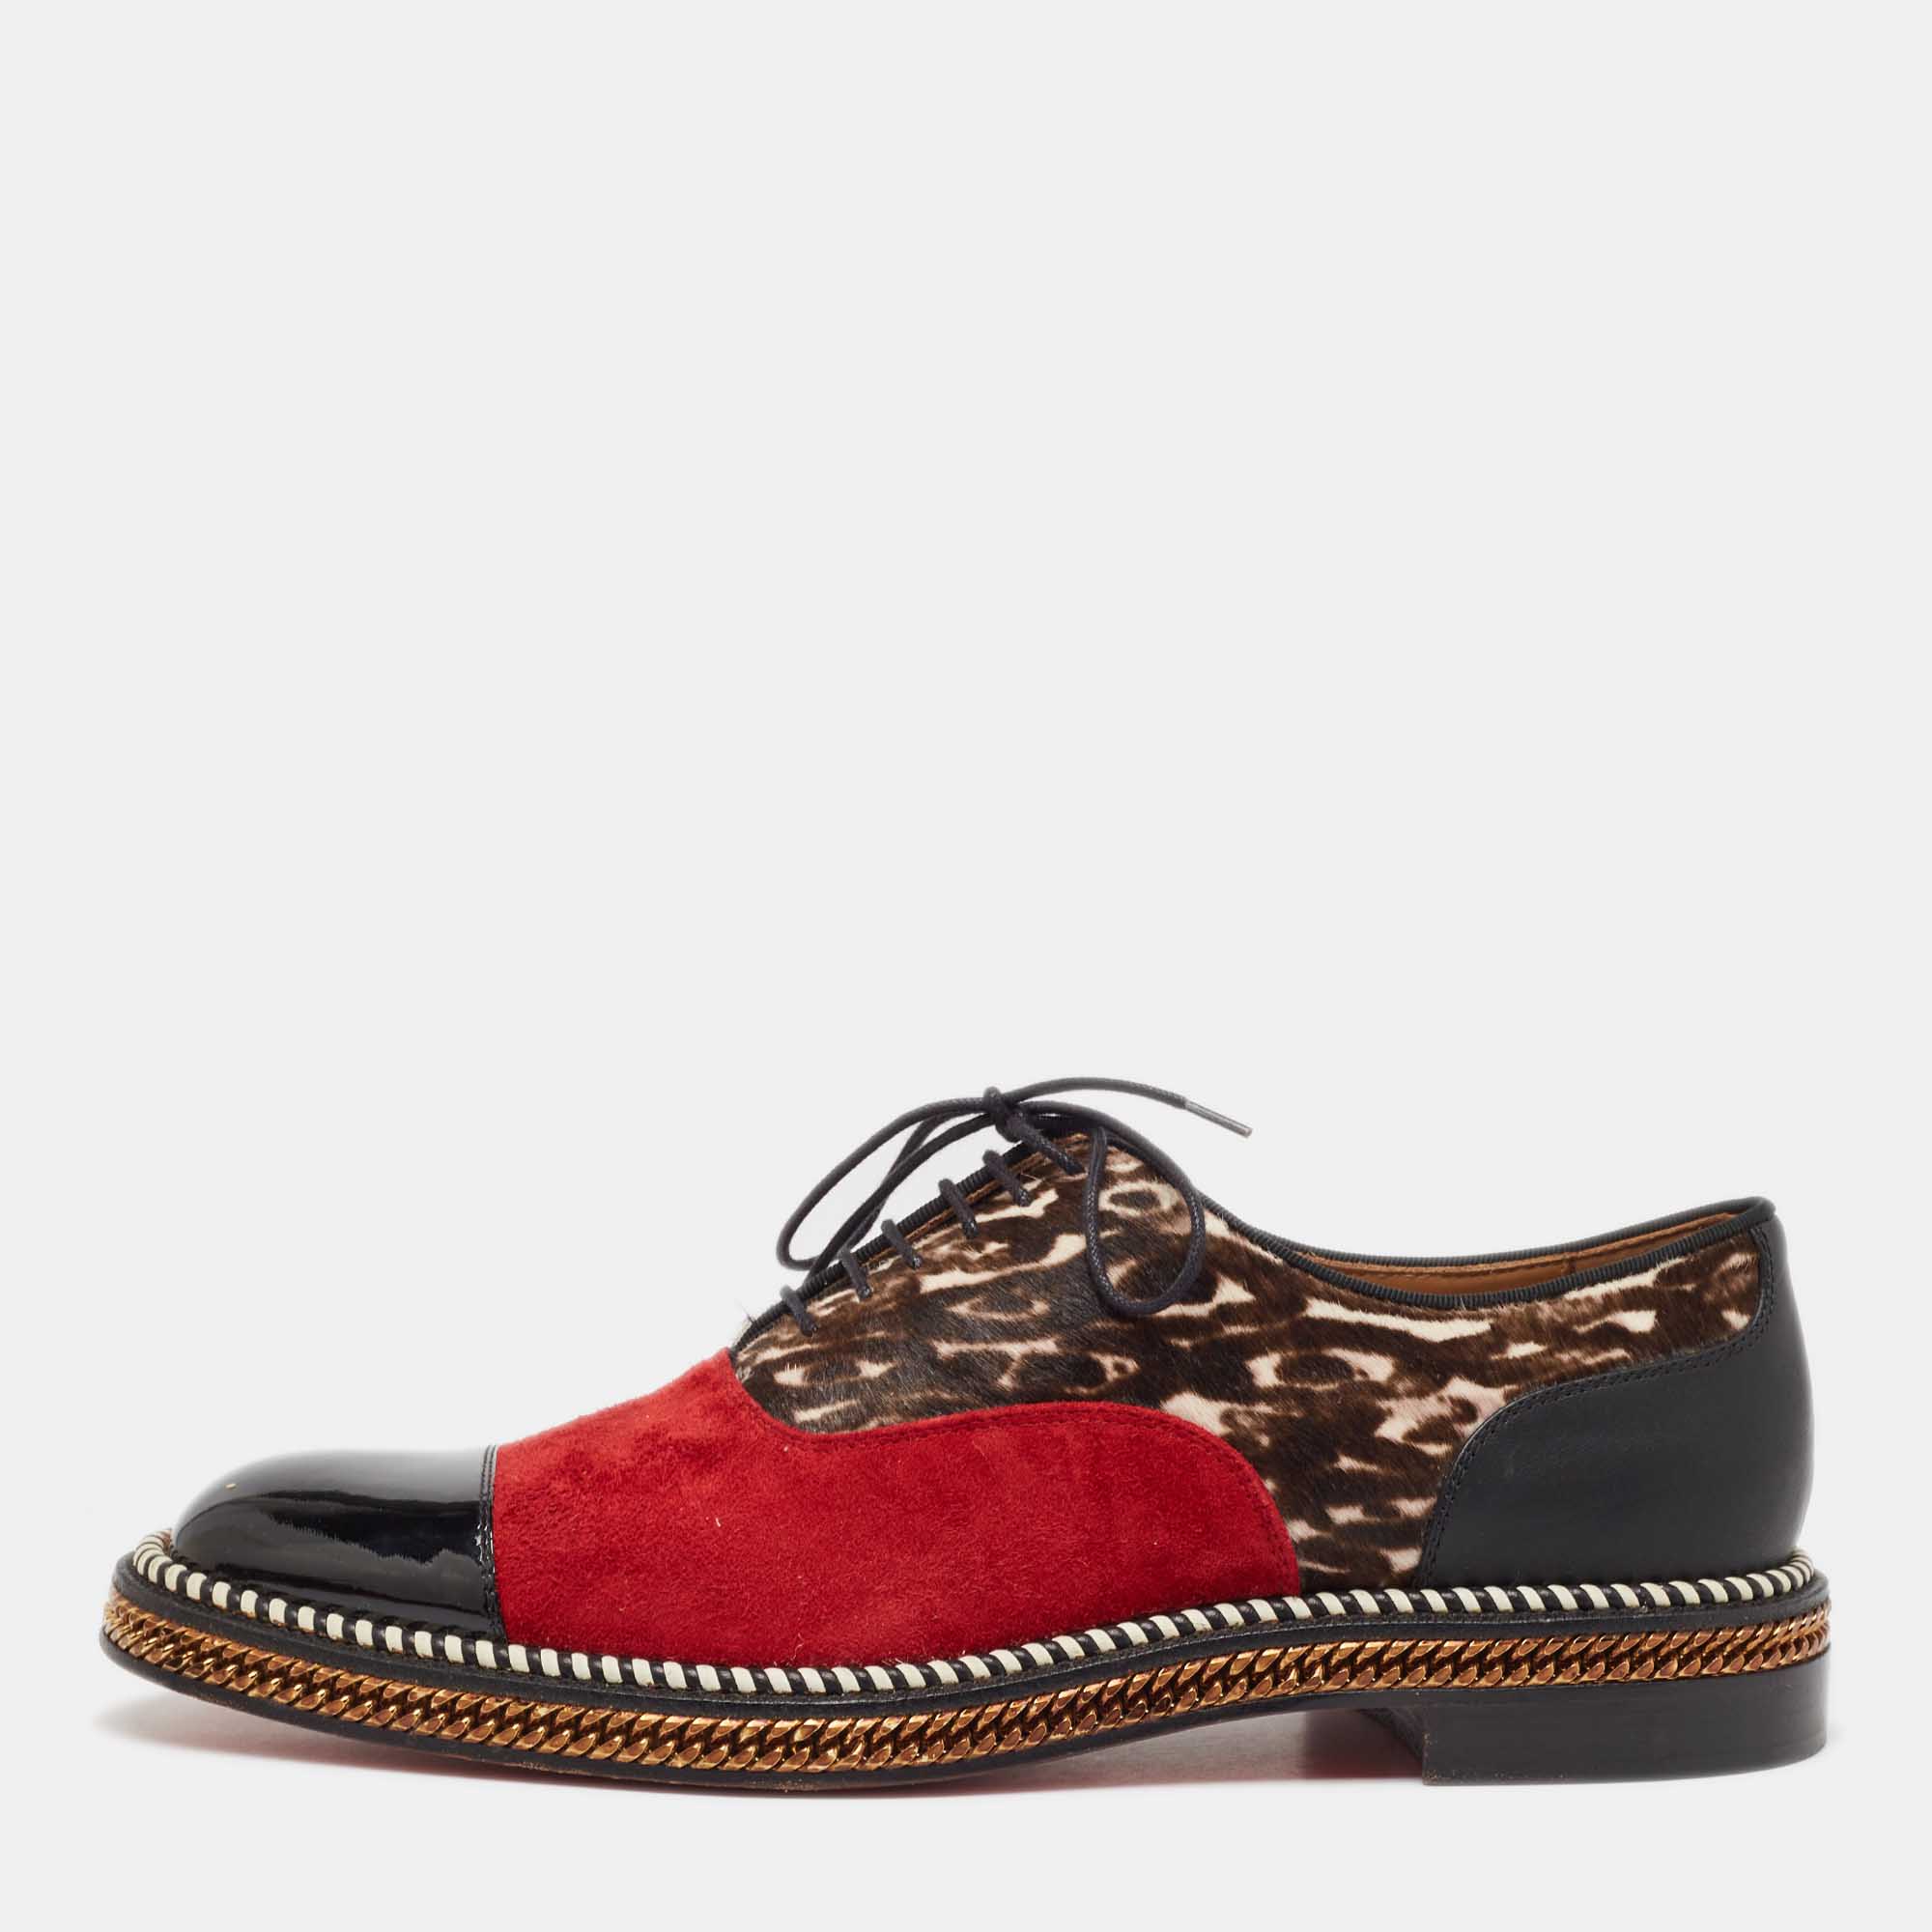 

Christian Louboutin Multicolor Suede and Calf Hair Lace Up Oxfords Size